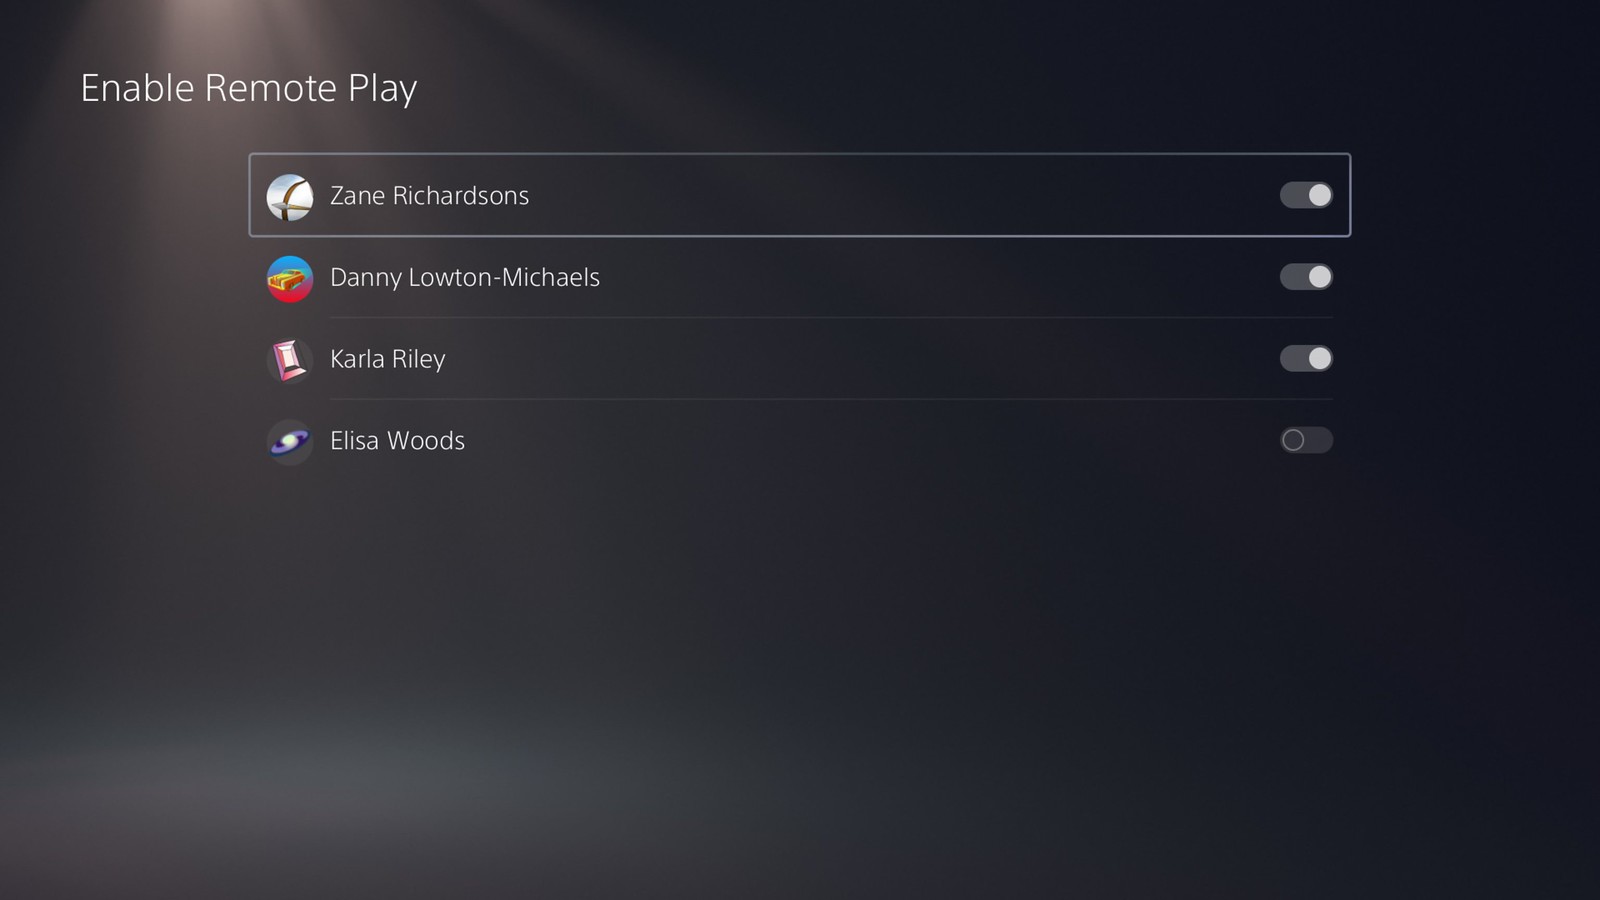 This menu is titled "Enable Remote Play" and lists user profiles with toggles to enable or disable Remote Play access individually. Profiles shown include names like Zane Richardsons, Danny Lowton-Michaels, Karla Riley, and Elisa Woods.